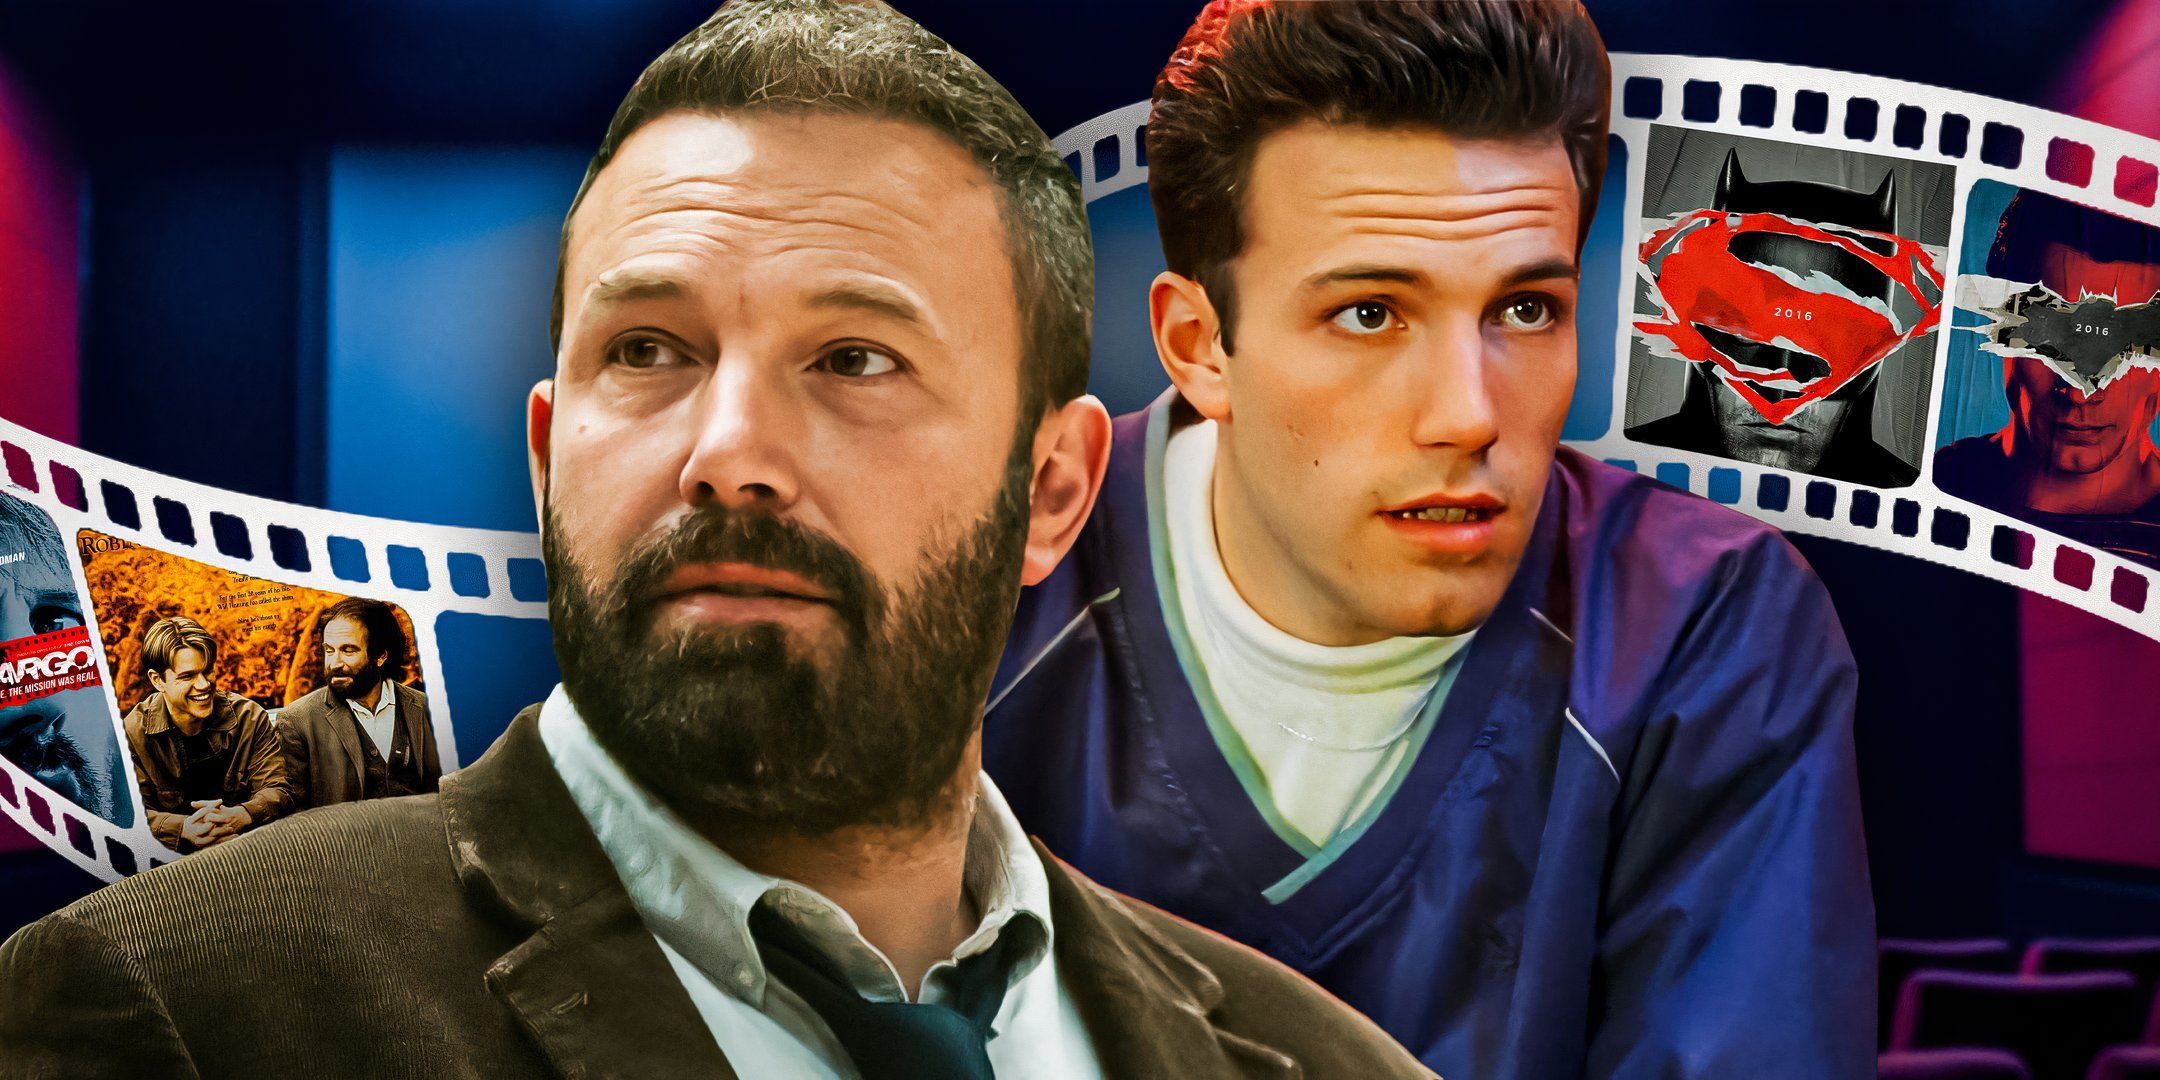 (Ben-Affleck-as-Chuckie)-from-Good-Will-Hunting-and-(Ben-Affleck-as-Jack)-from-The-Way-Back-